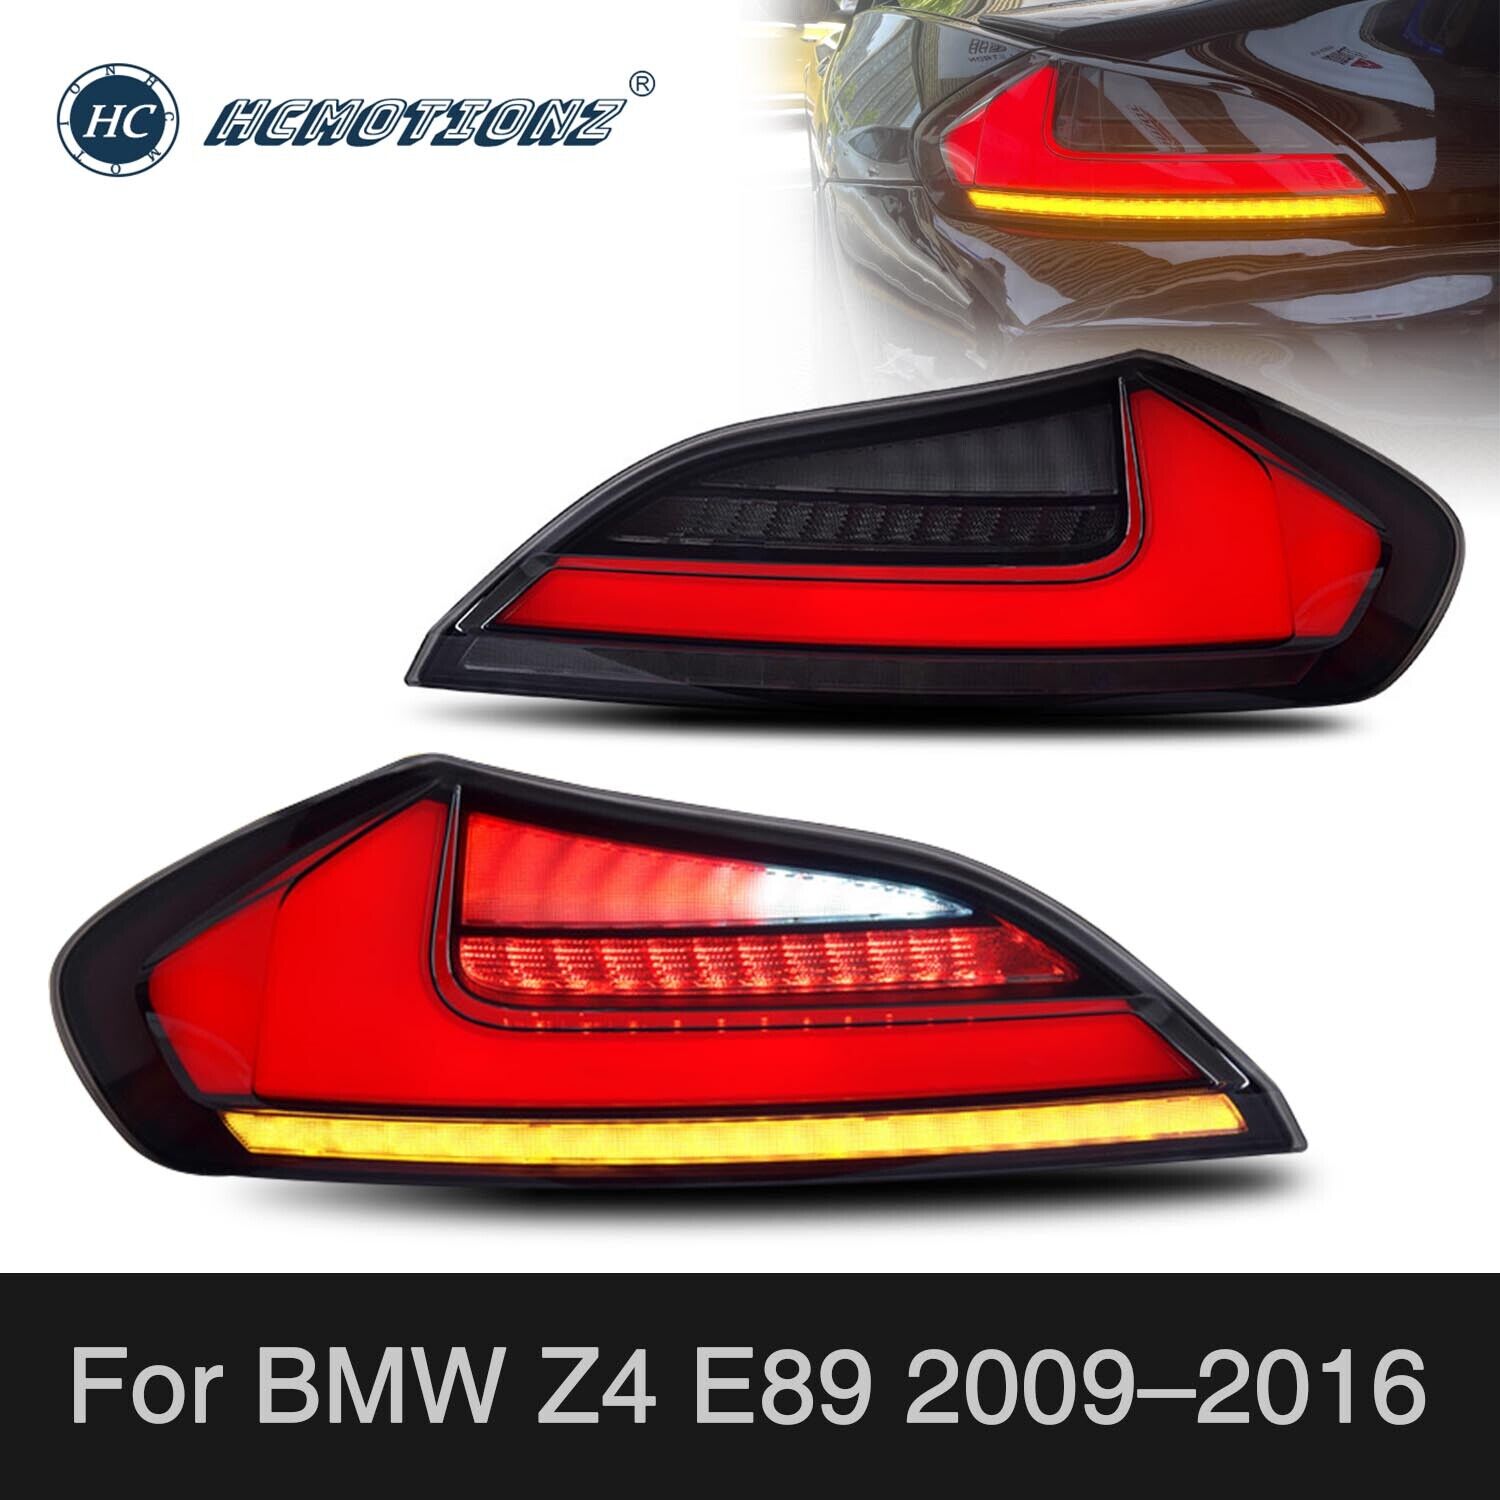 HC Motion Smoked LED Tail Lights For BMW Z4 E89 2009-2016 Rear Lamps Animation